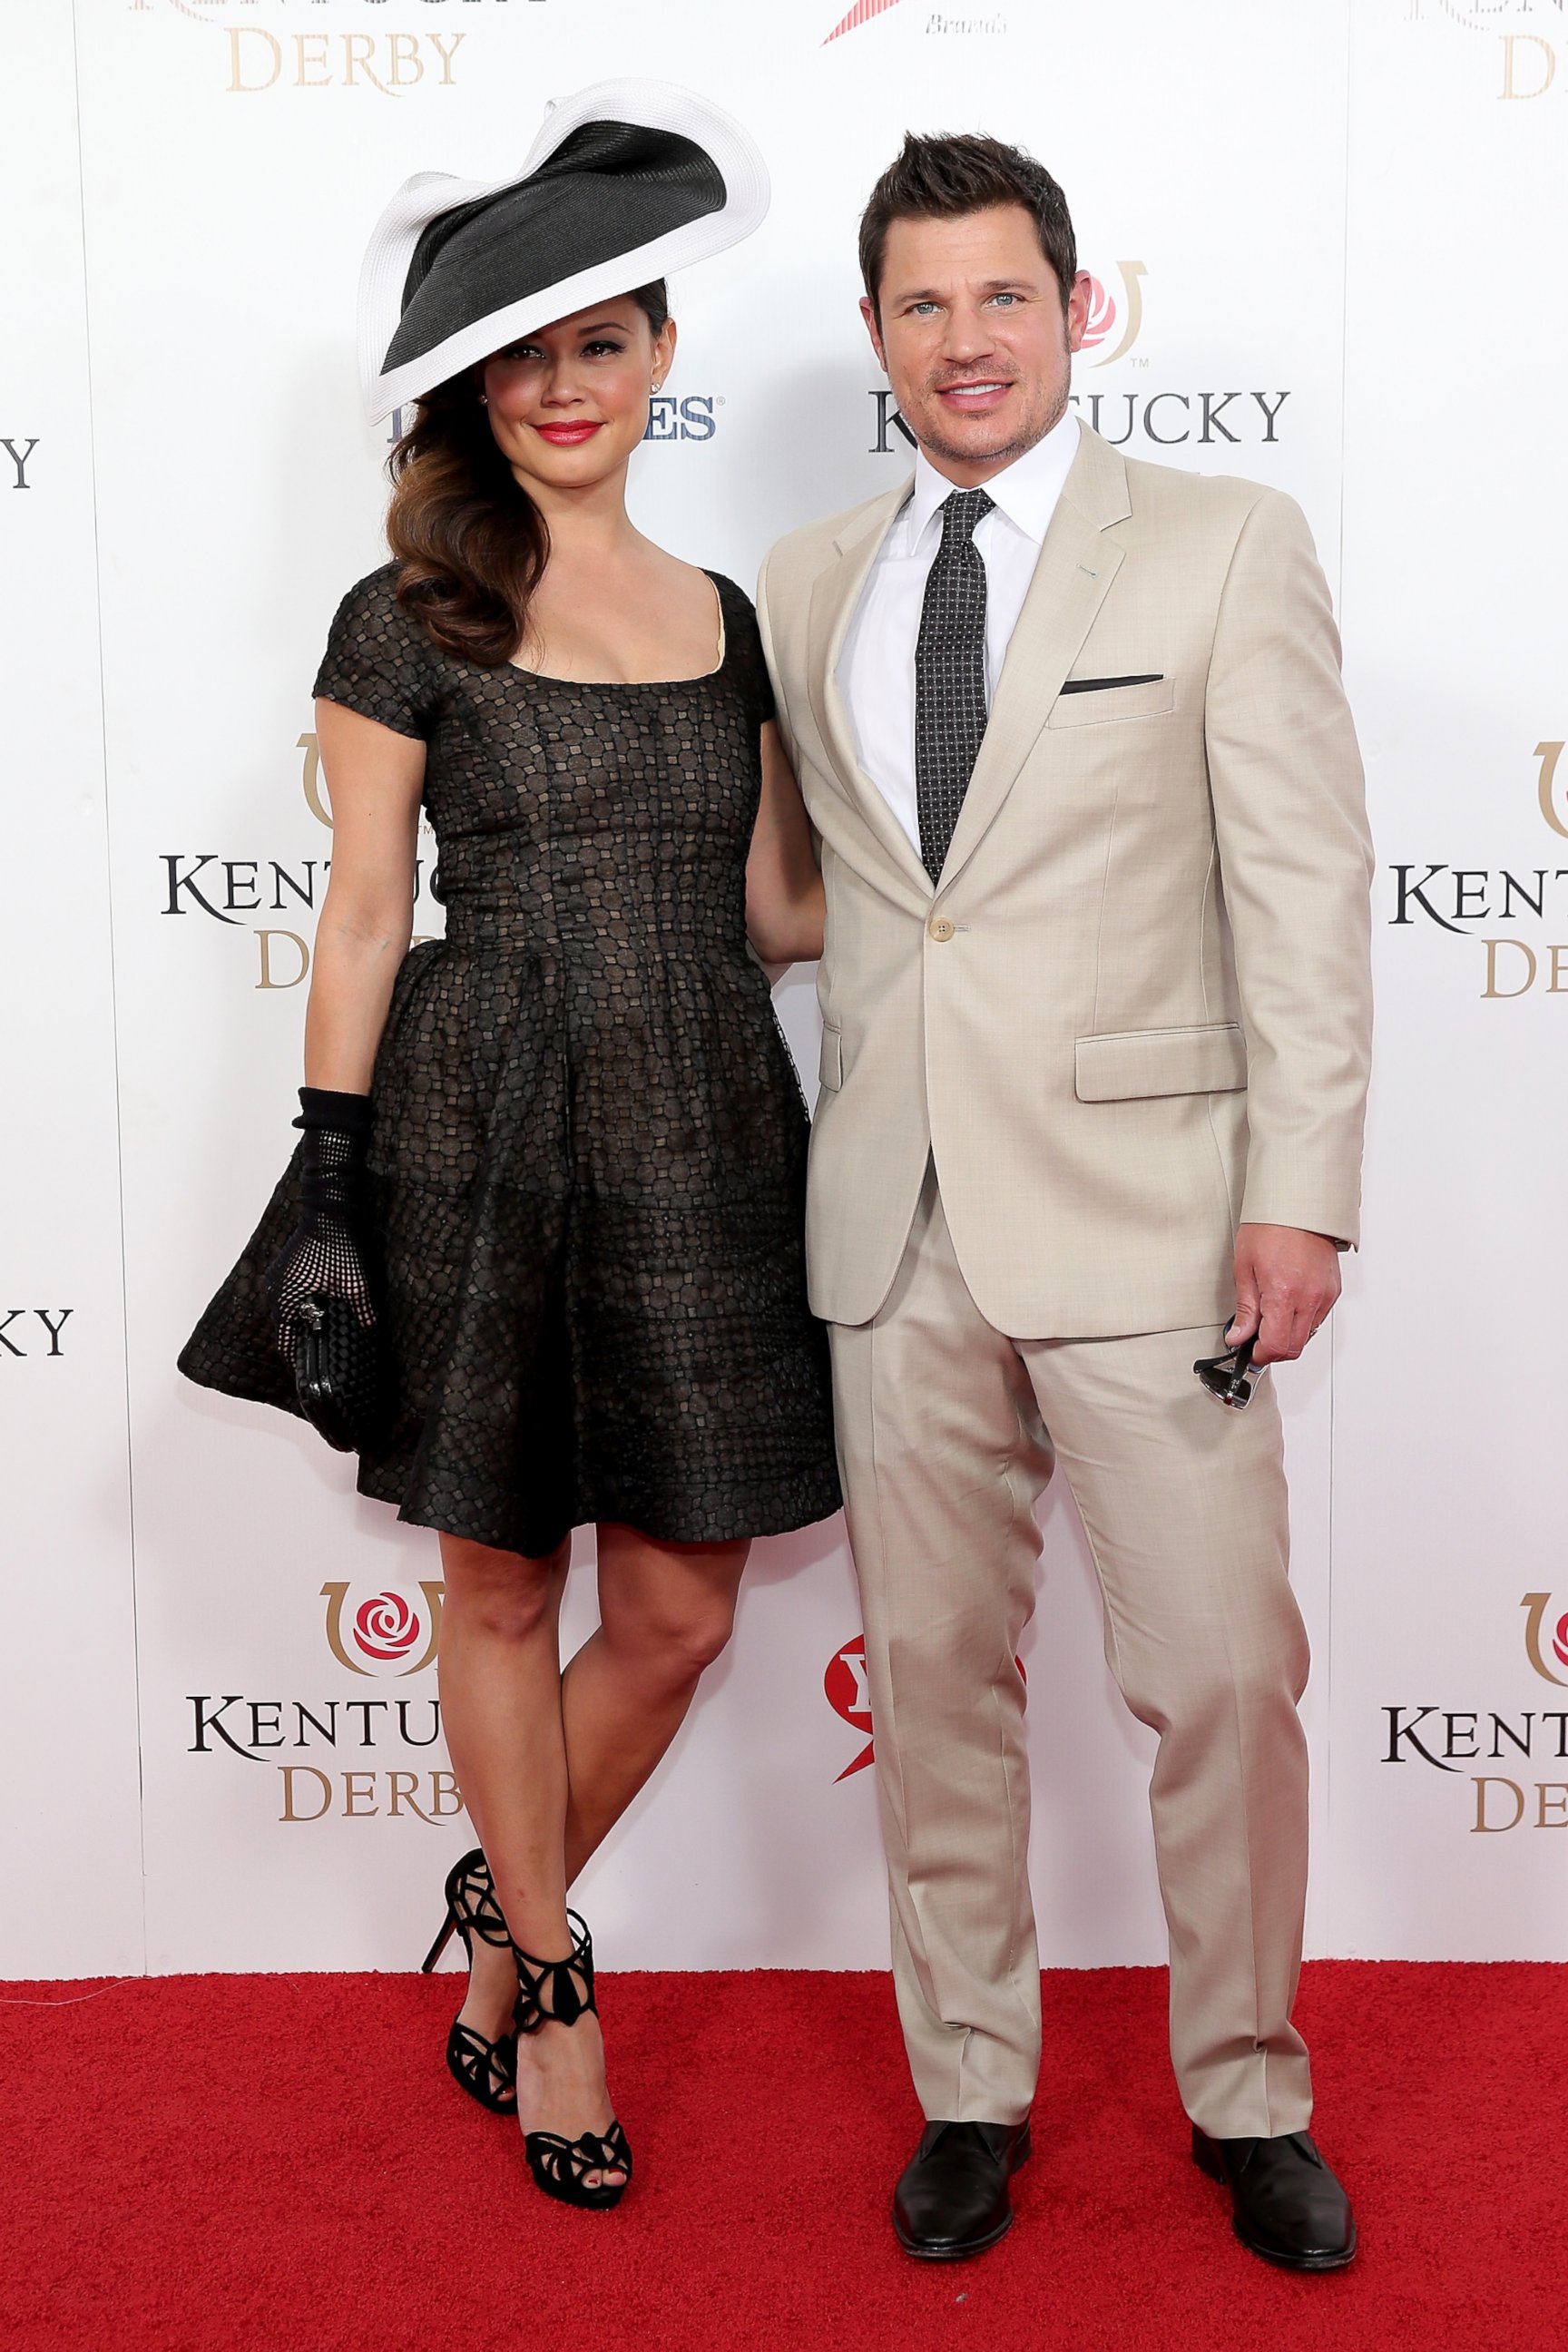 PHOTO: Vanessa Lachey and Nick Lachey attend the 141st Kentucky Derby at Churchill Downs on May 2, 2015 in Louisville, Ky. 